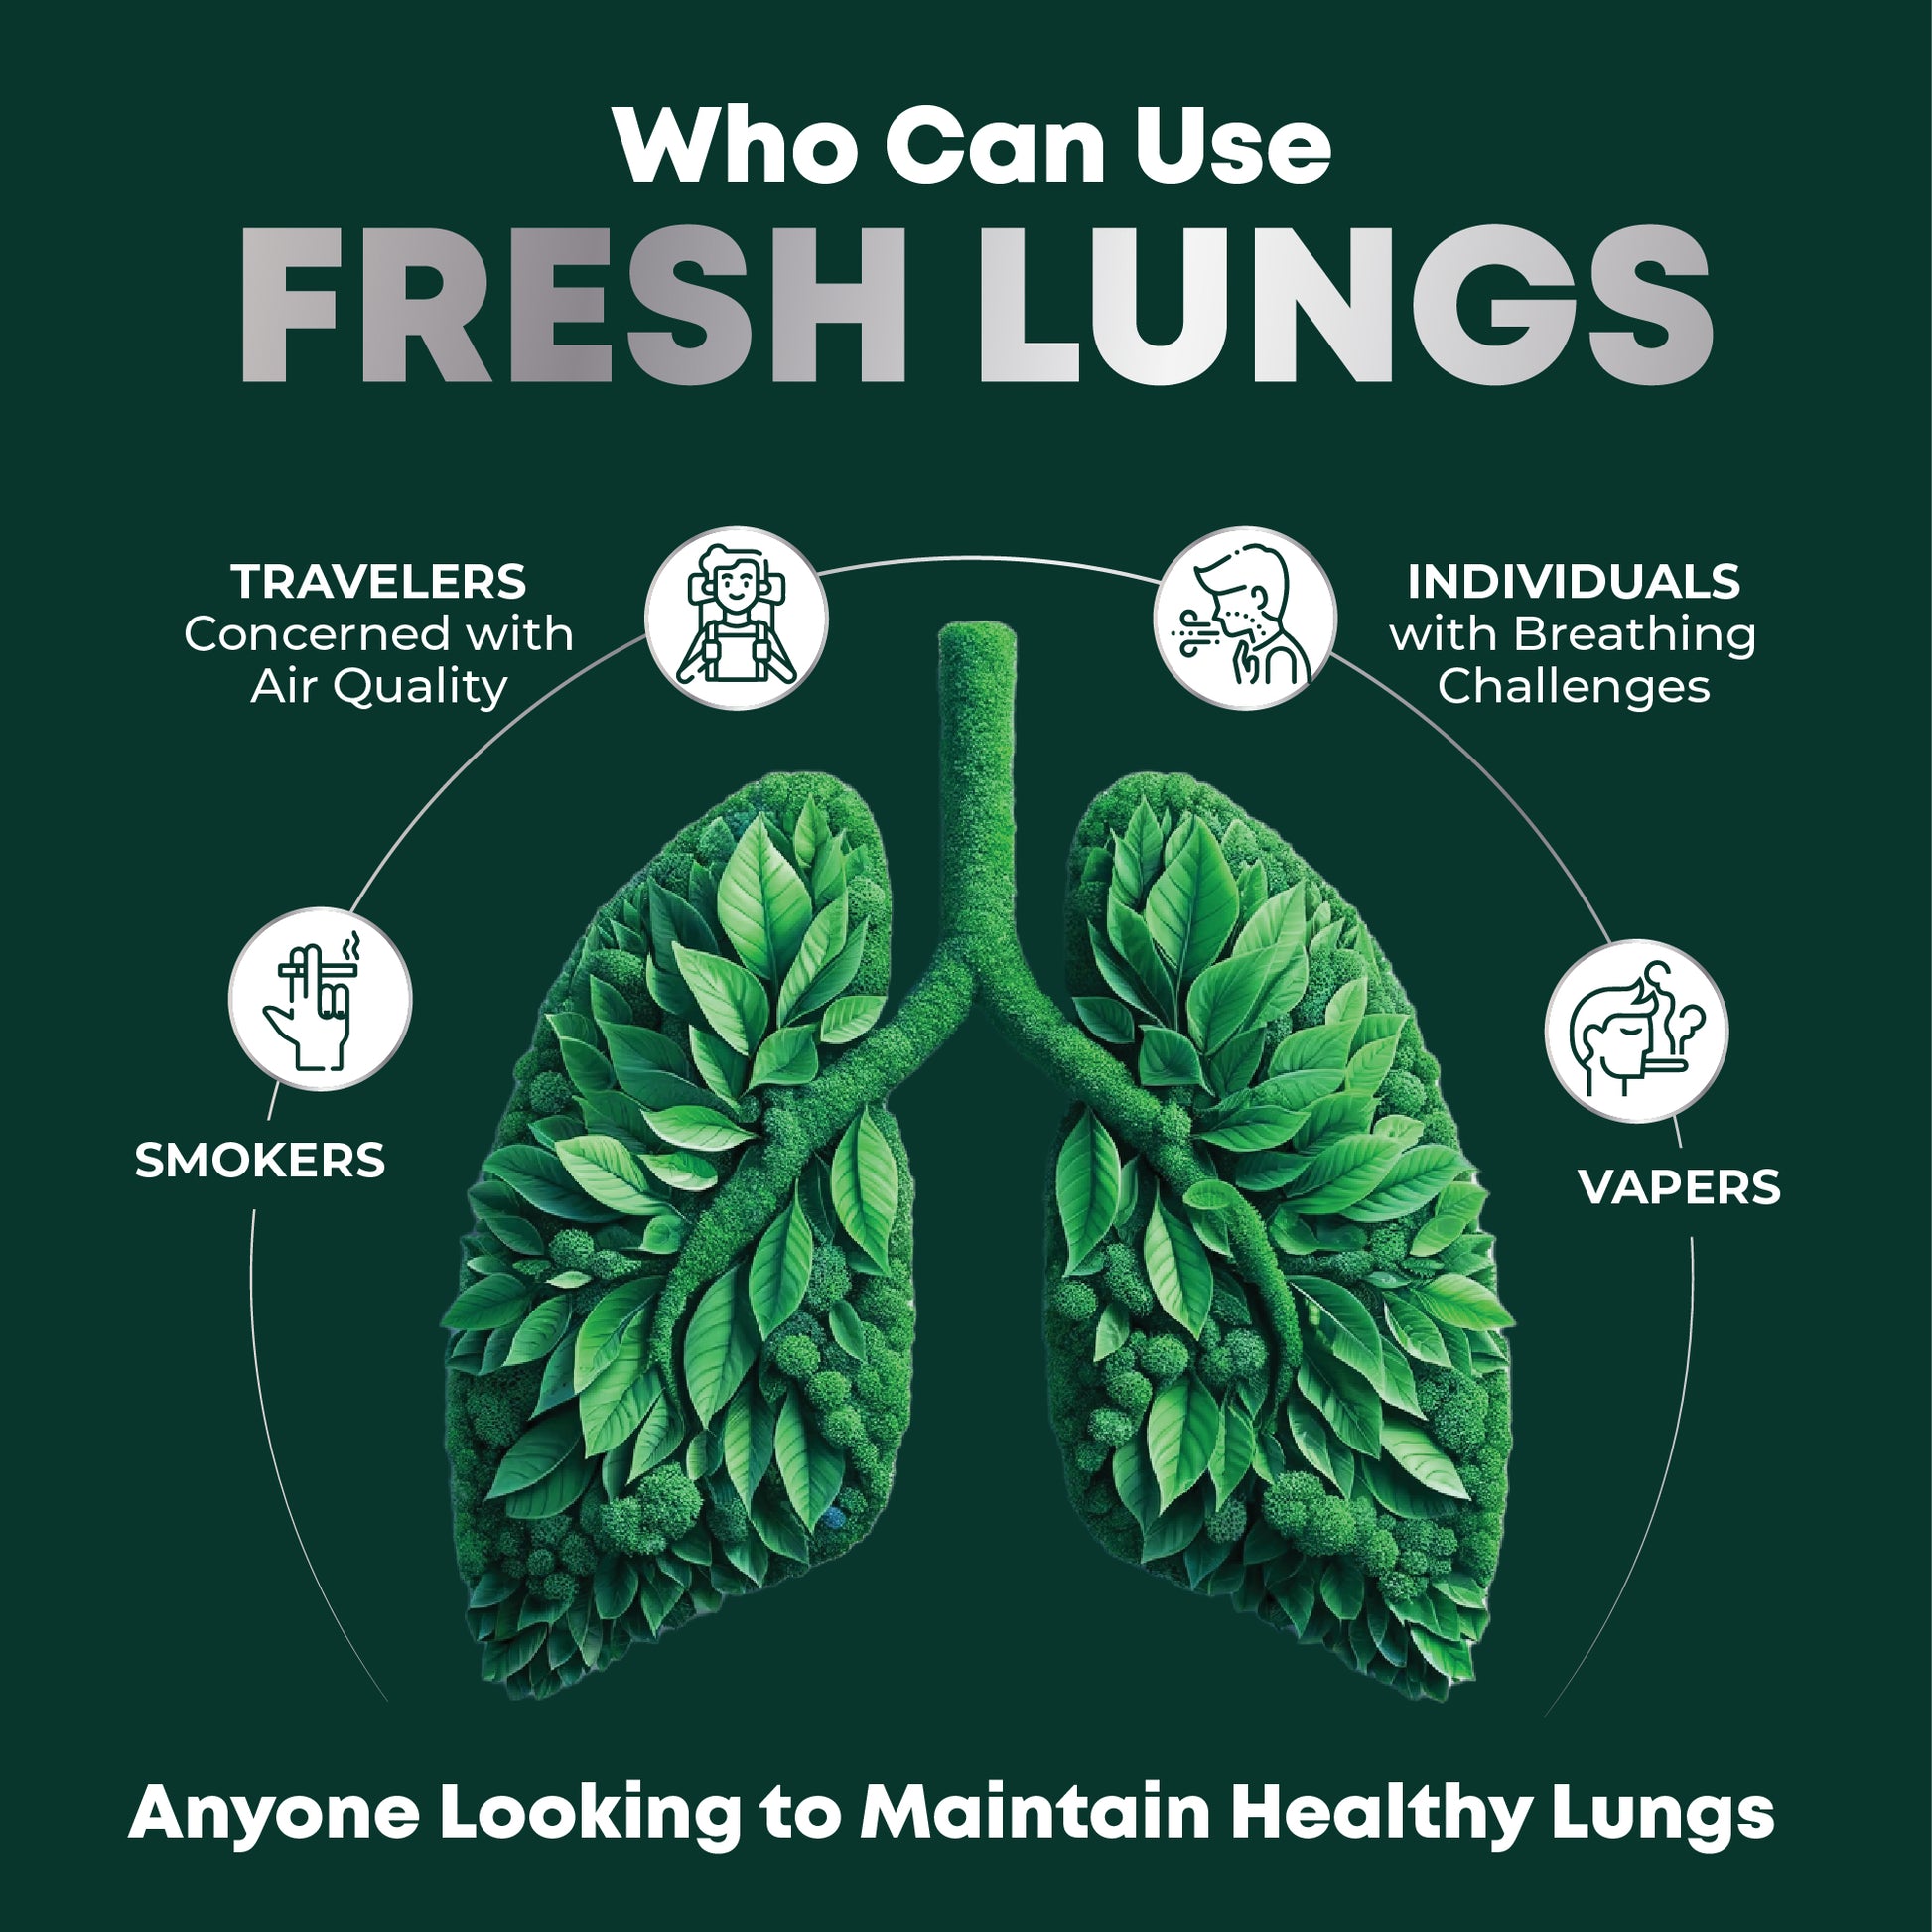 Lungs detox health to clean your lungs improve lung health keep your lungs healthy 